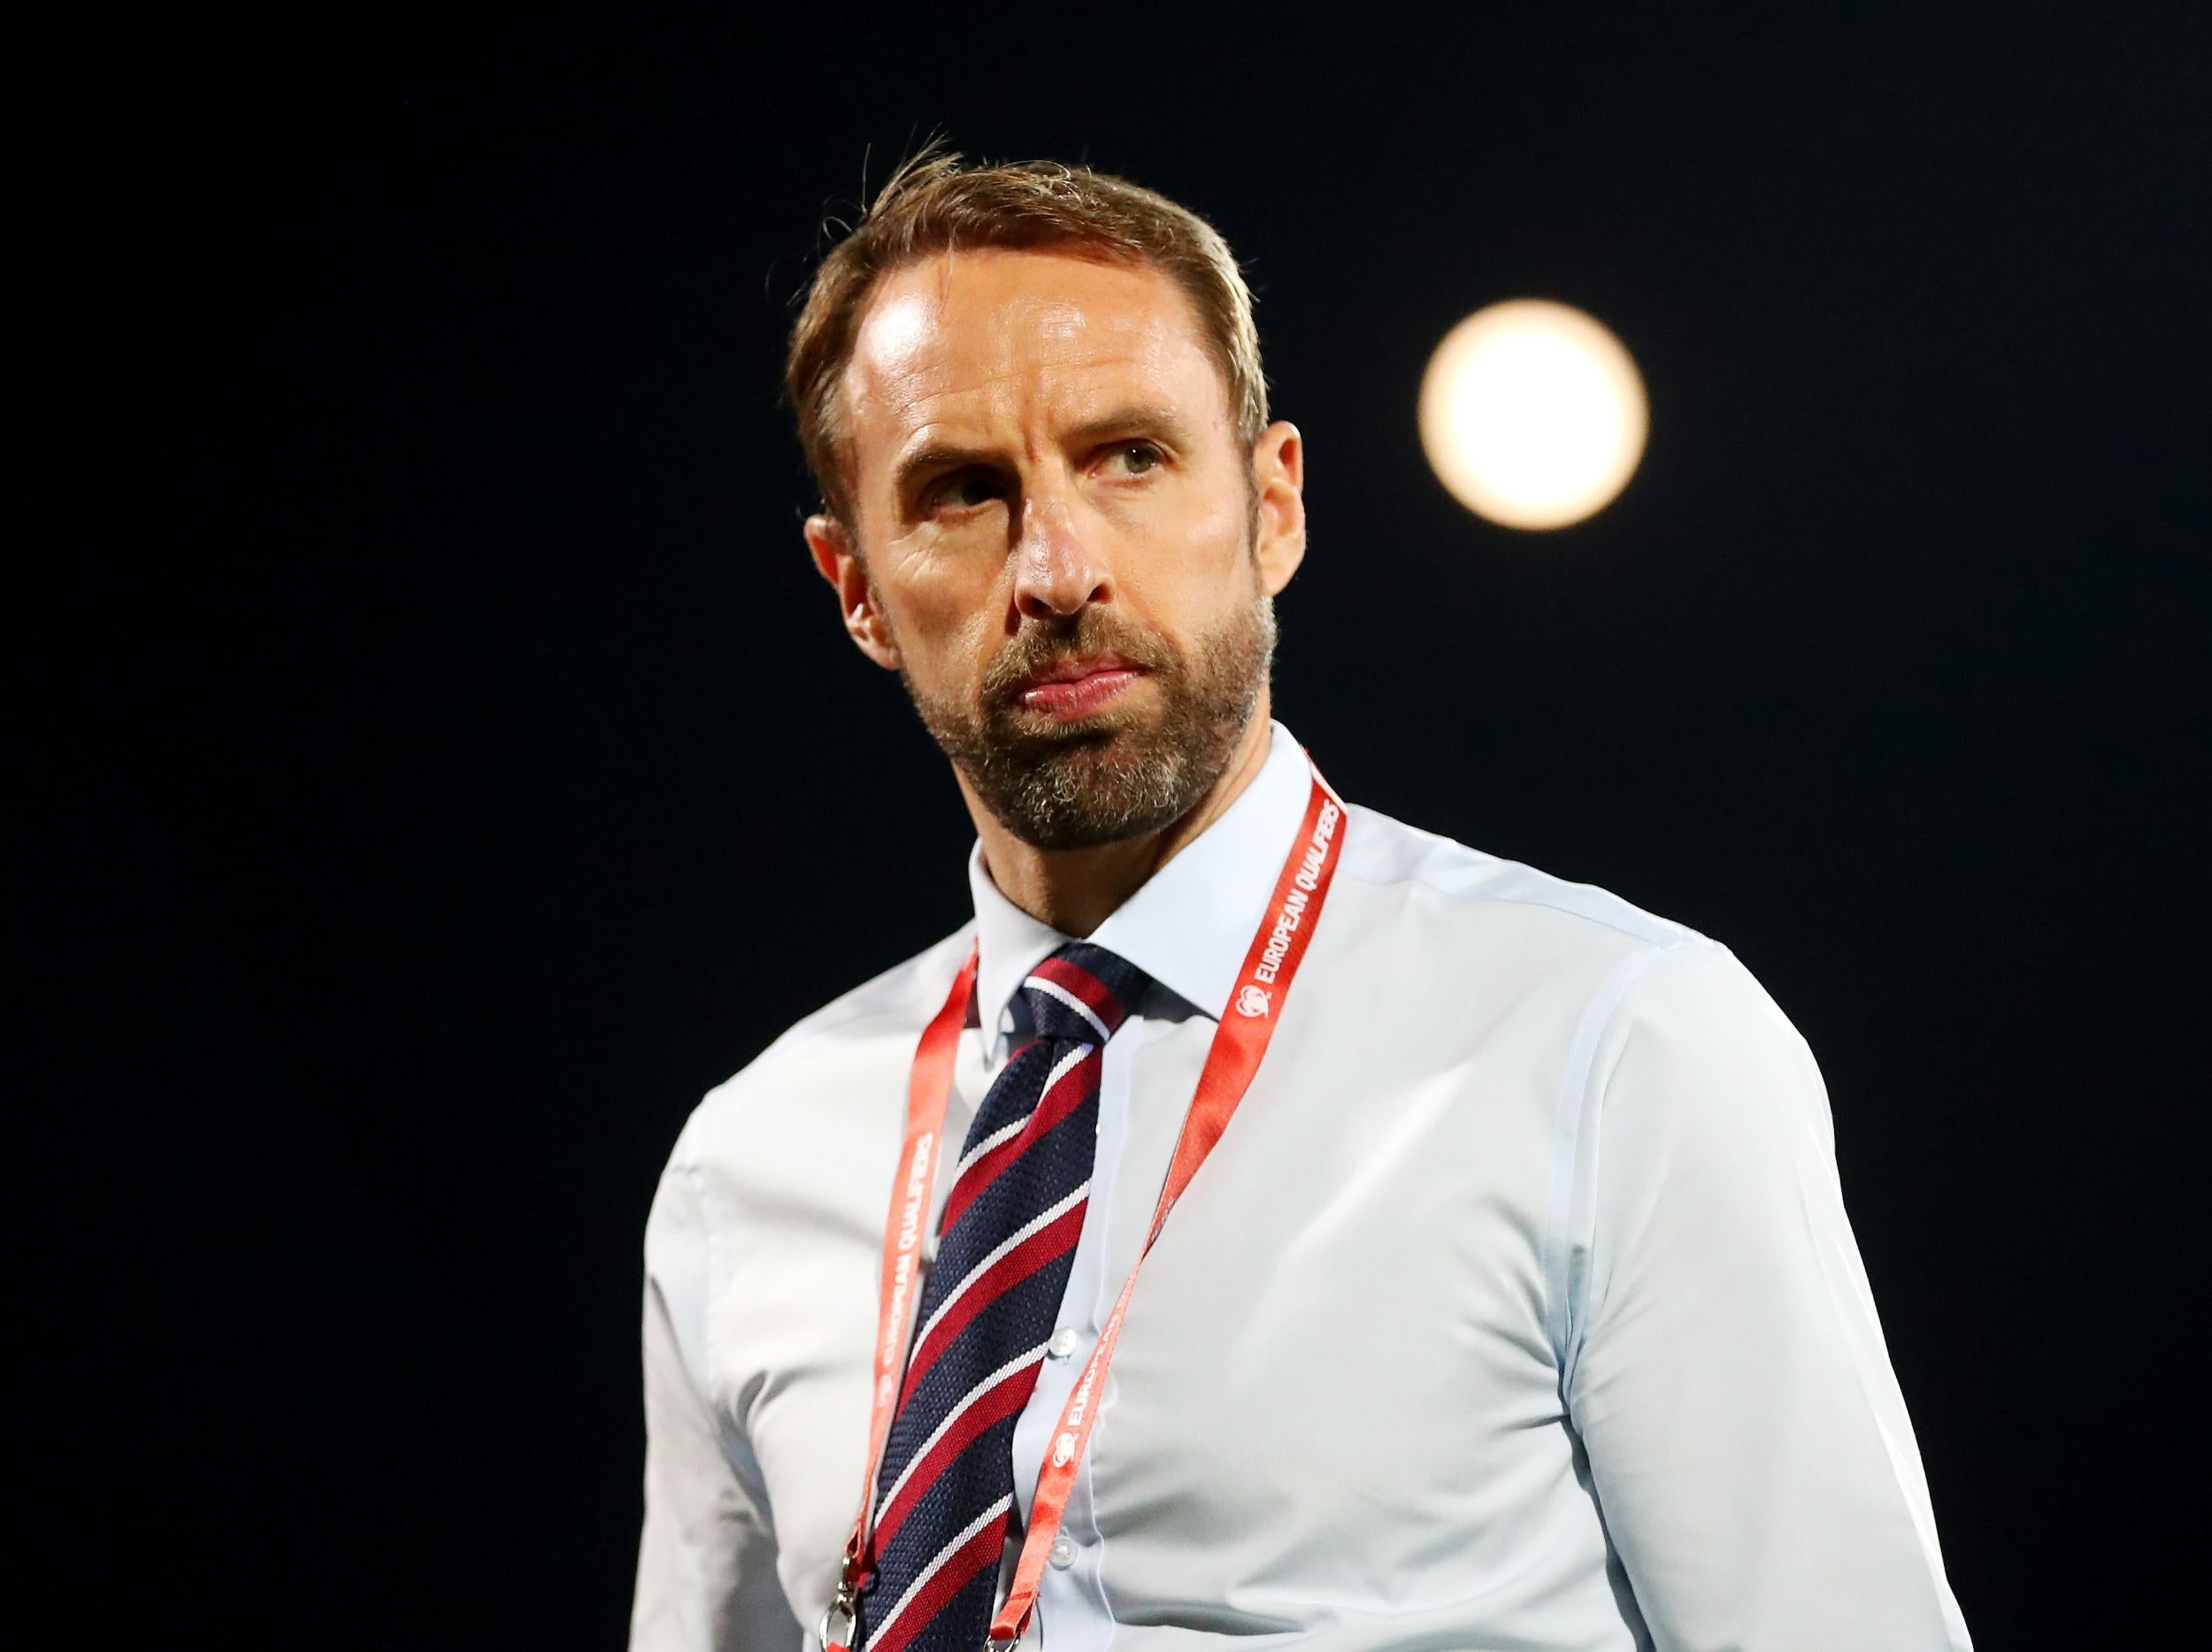 Bulgaria vs England, Gareth Southgate press conference LIVE: Latest reaction as racism mars win